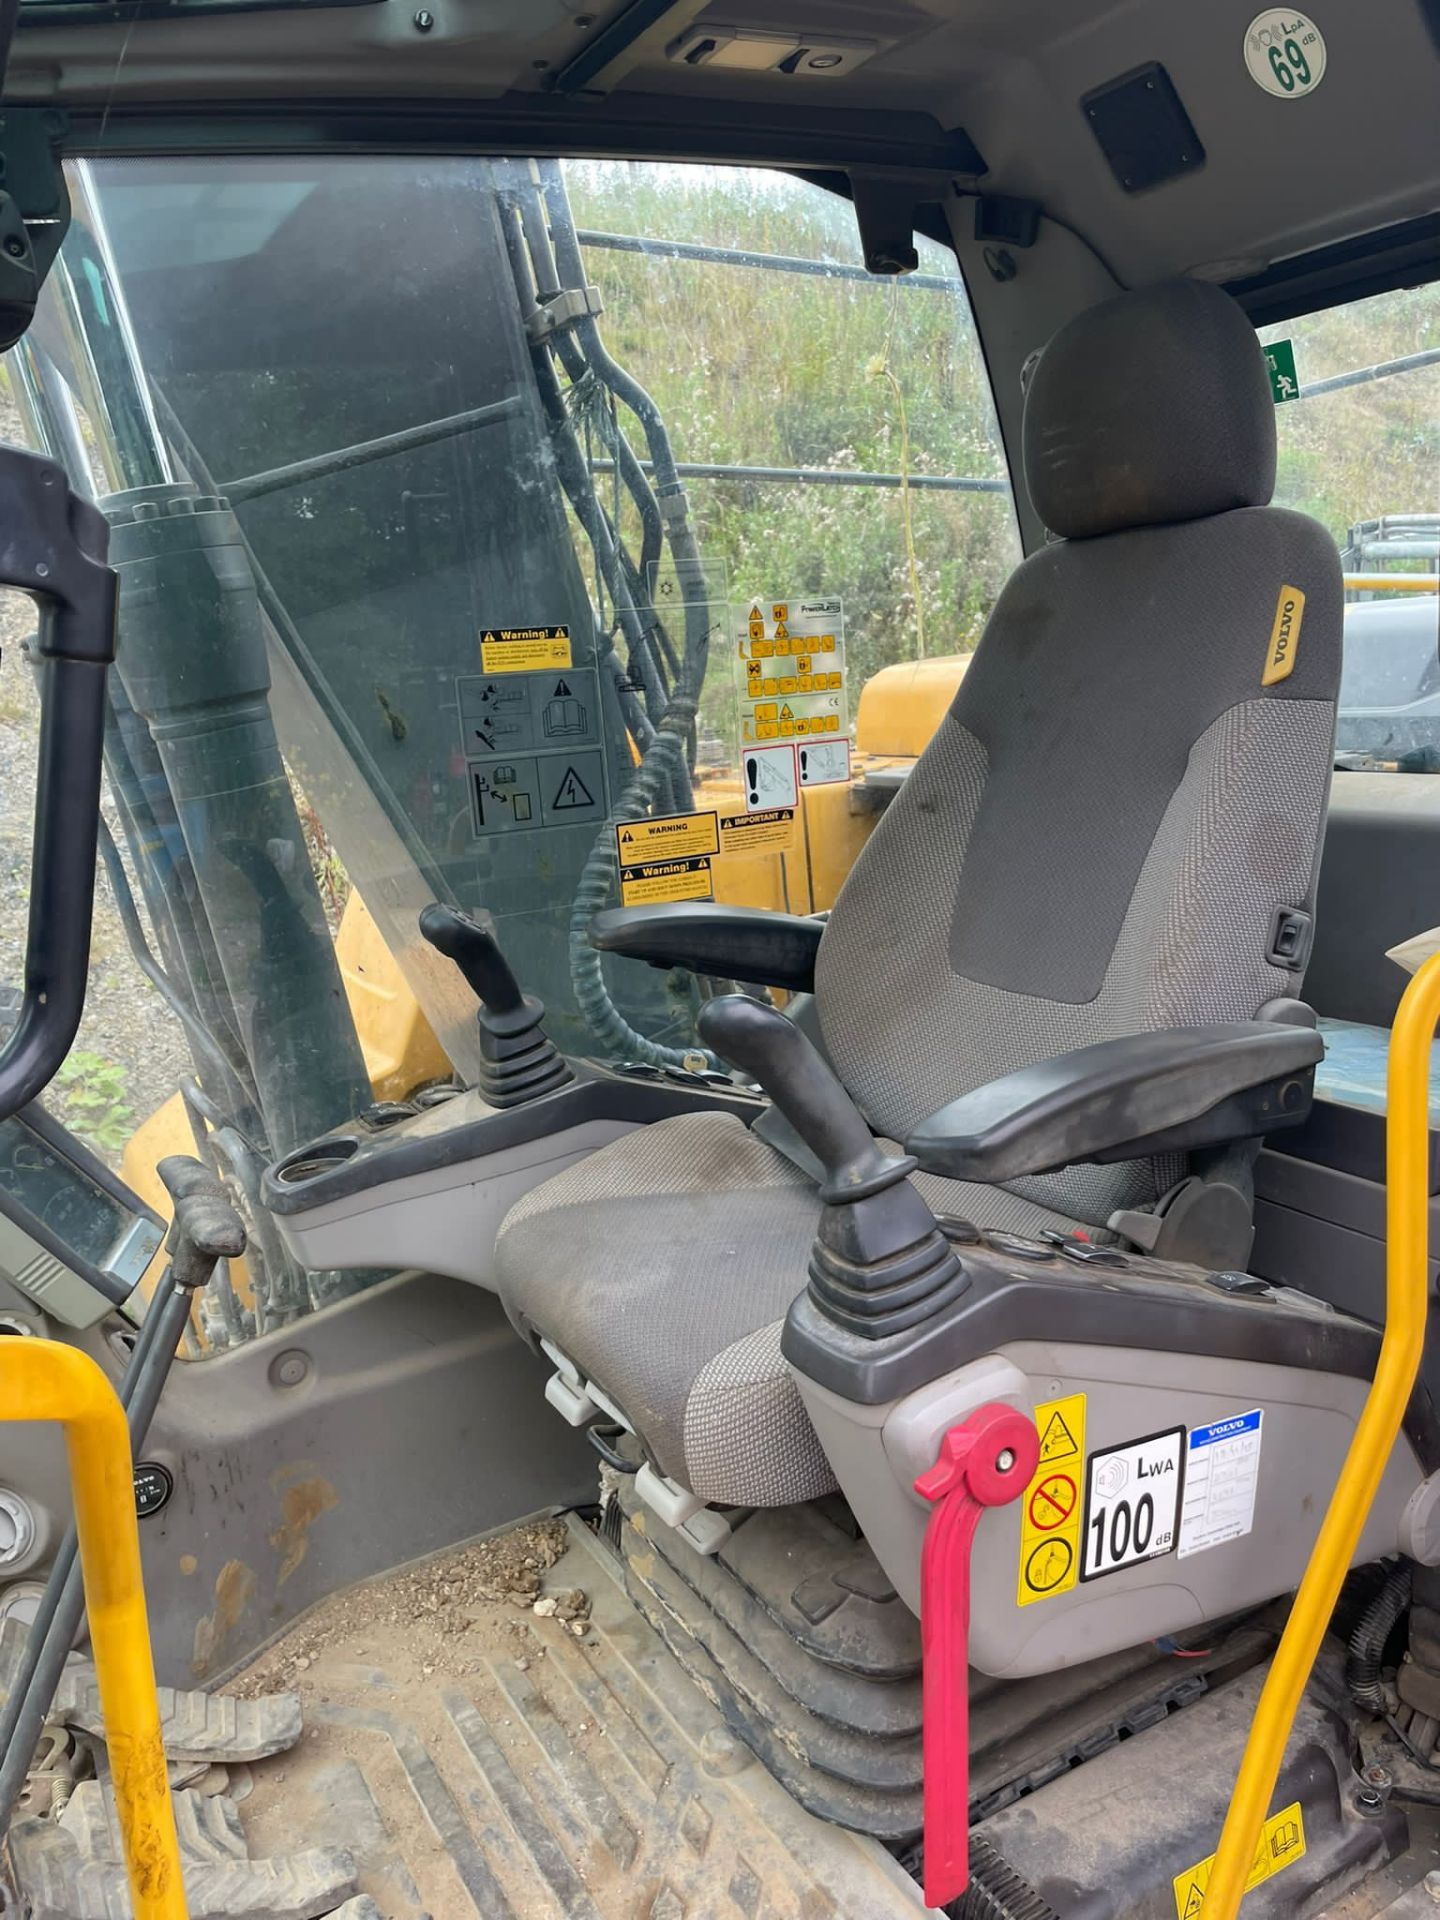 2014 VOLVO EC140DL 14 TON STEEL TRACKED EXCAVATOR, RUNS DRIVES AND DIGS, FULLY GLASS CAB *PLUS VAT* - Image 6 of 7